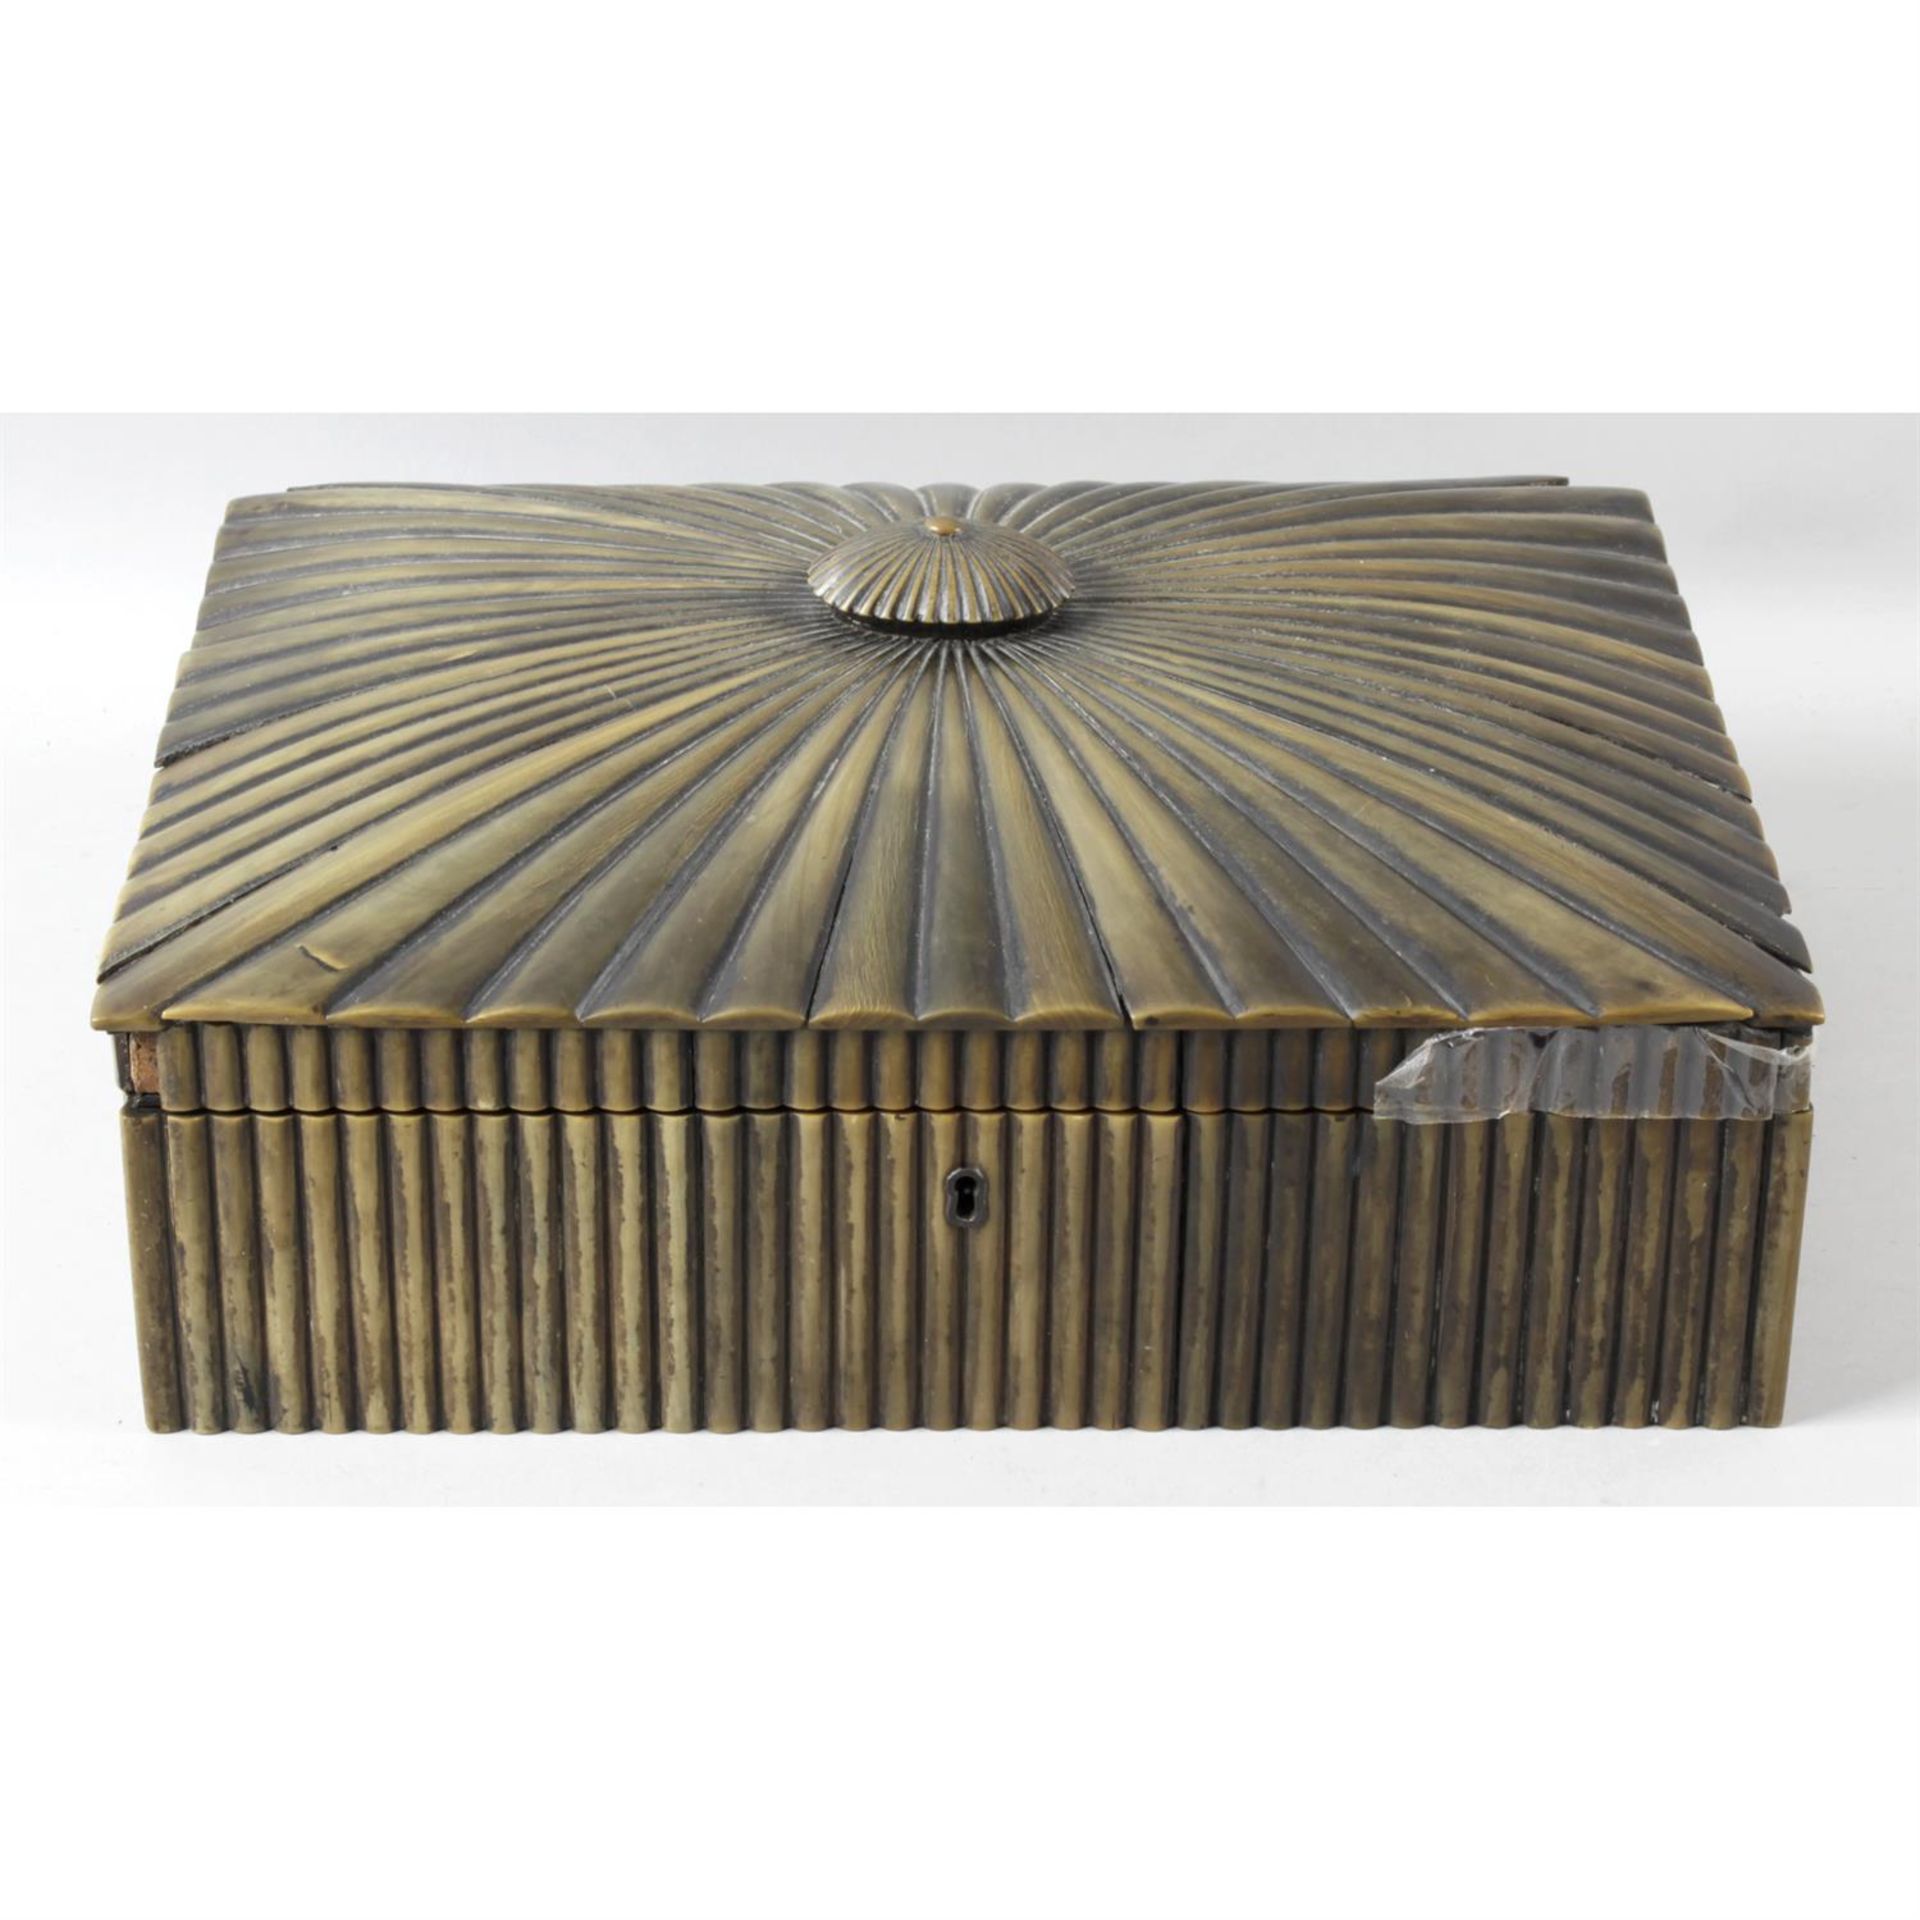 A 19th century Anglo Indian horn veneered ladies work box or sewing box.